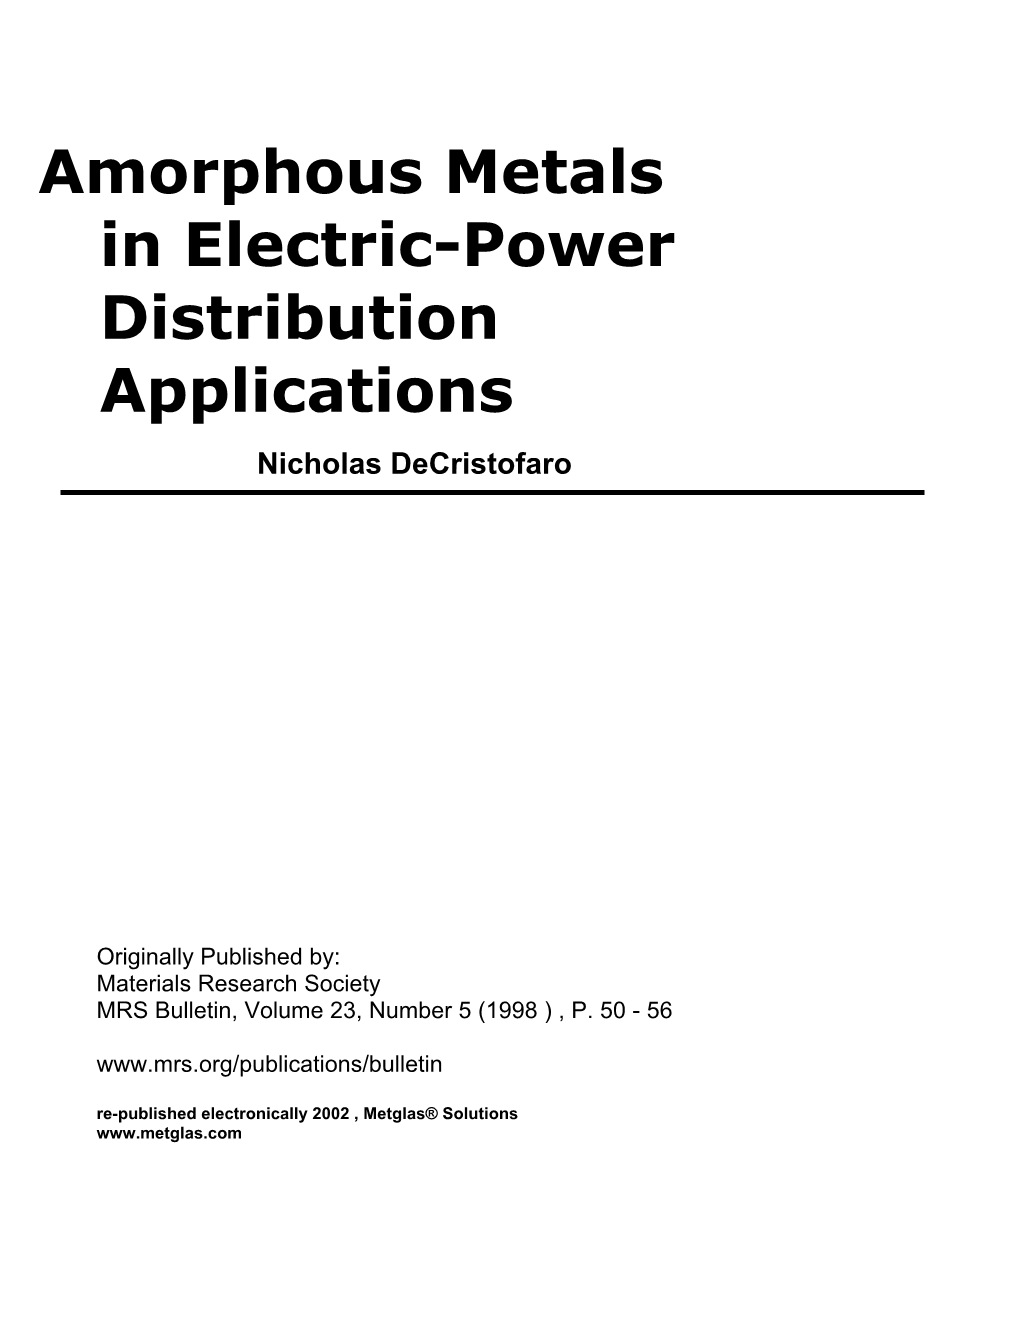 Amorphous Metals in Electric-Power Distribution Applications